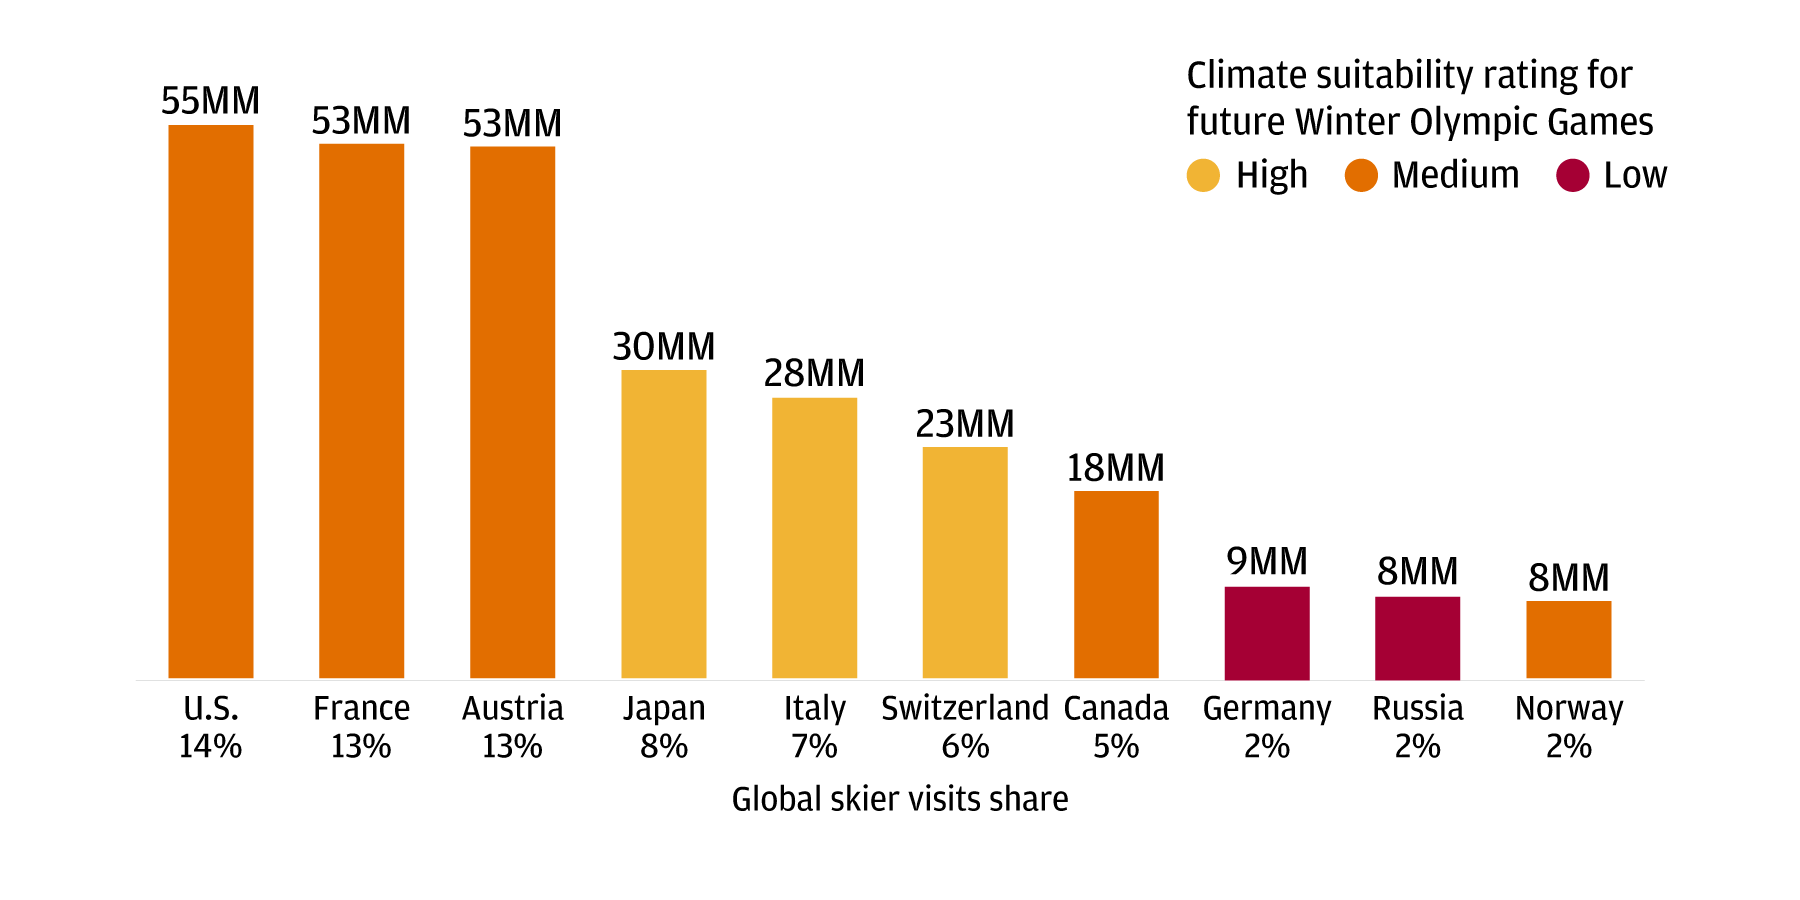 This chart shows Pre-COVID-19 skier visits by country (2018–19) and projected climate suitability ratings for 2050 Winter Olympic Games, for prior Winter Olympics locations